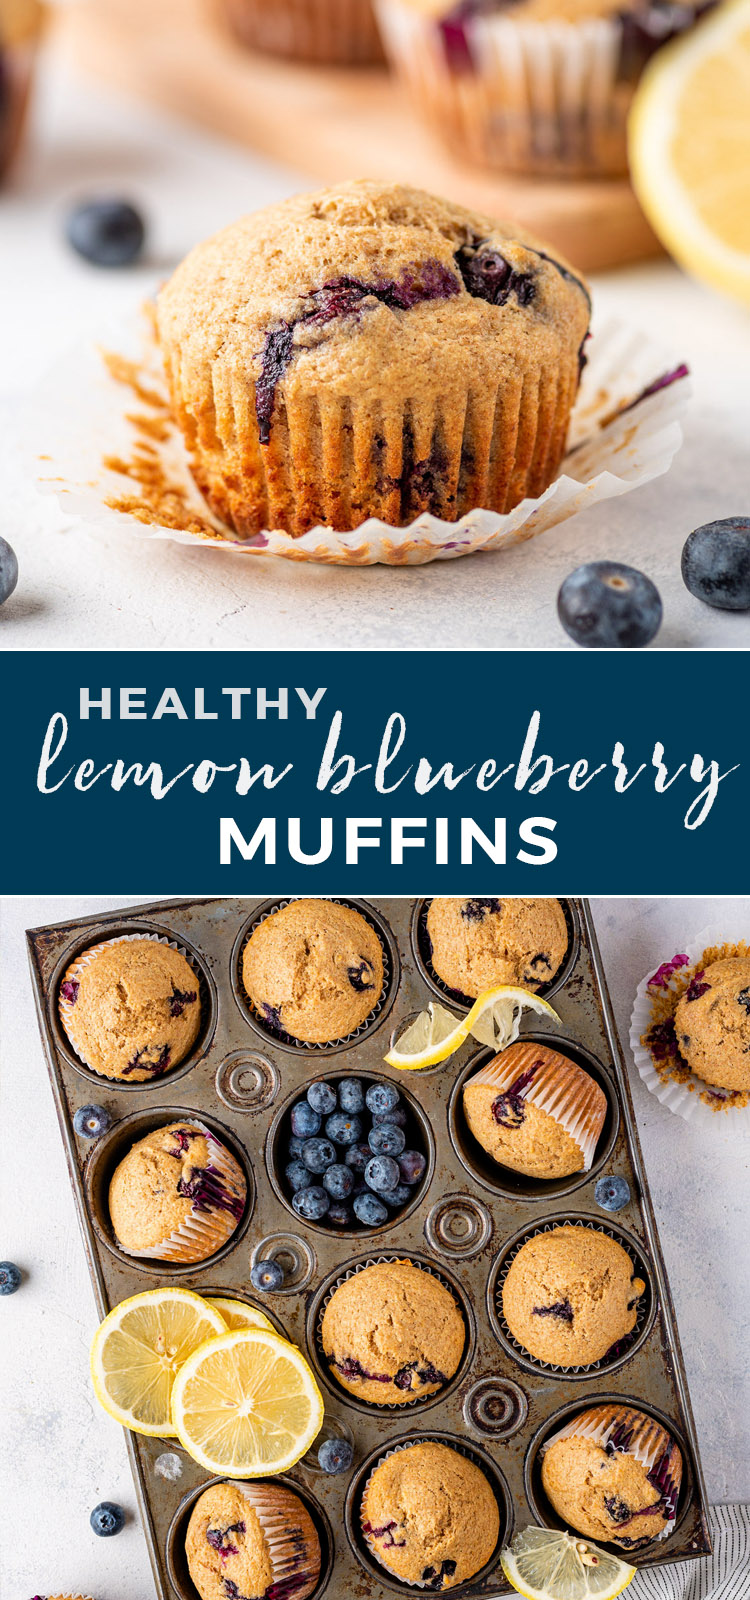 Healthy Lemon Blueberry Muffins | Gimme Delicious